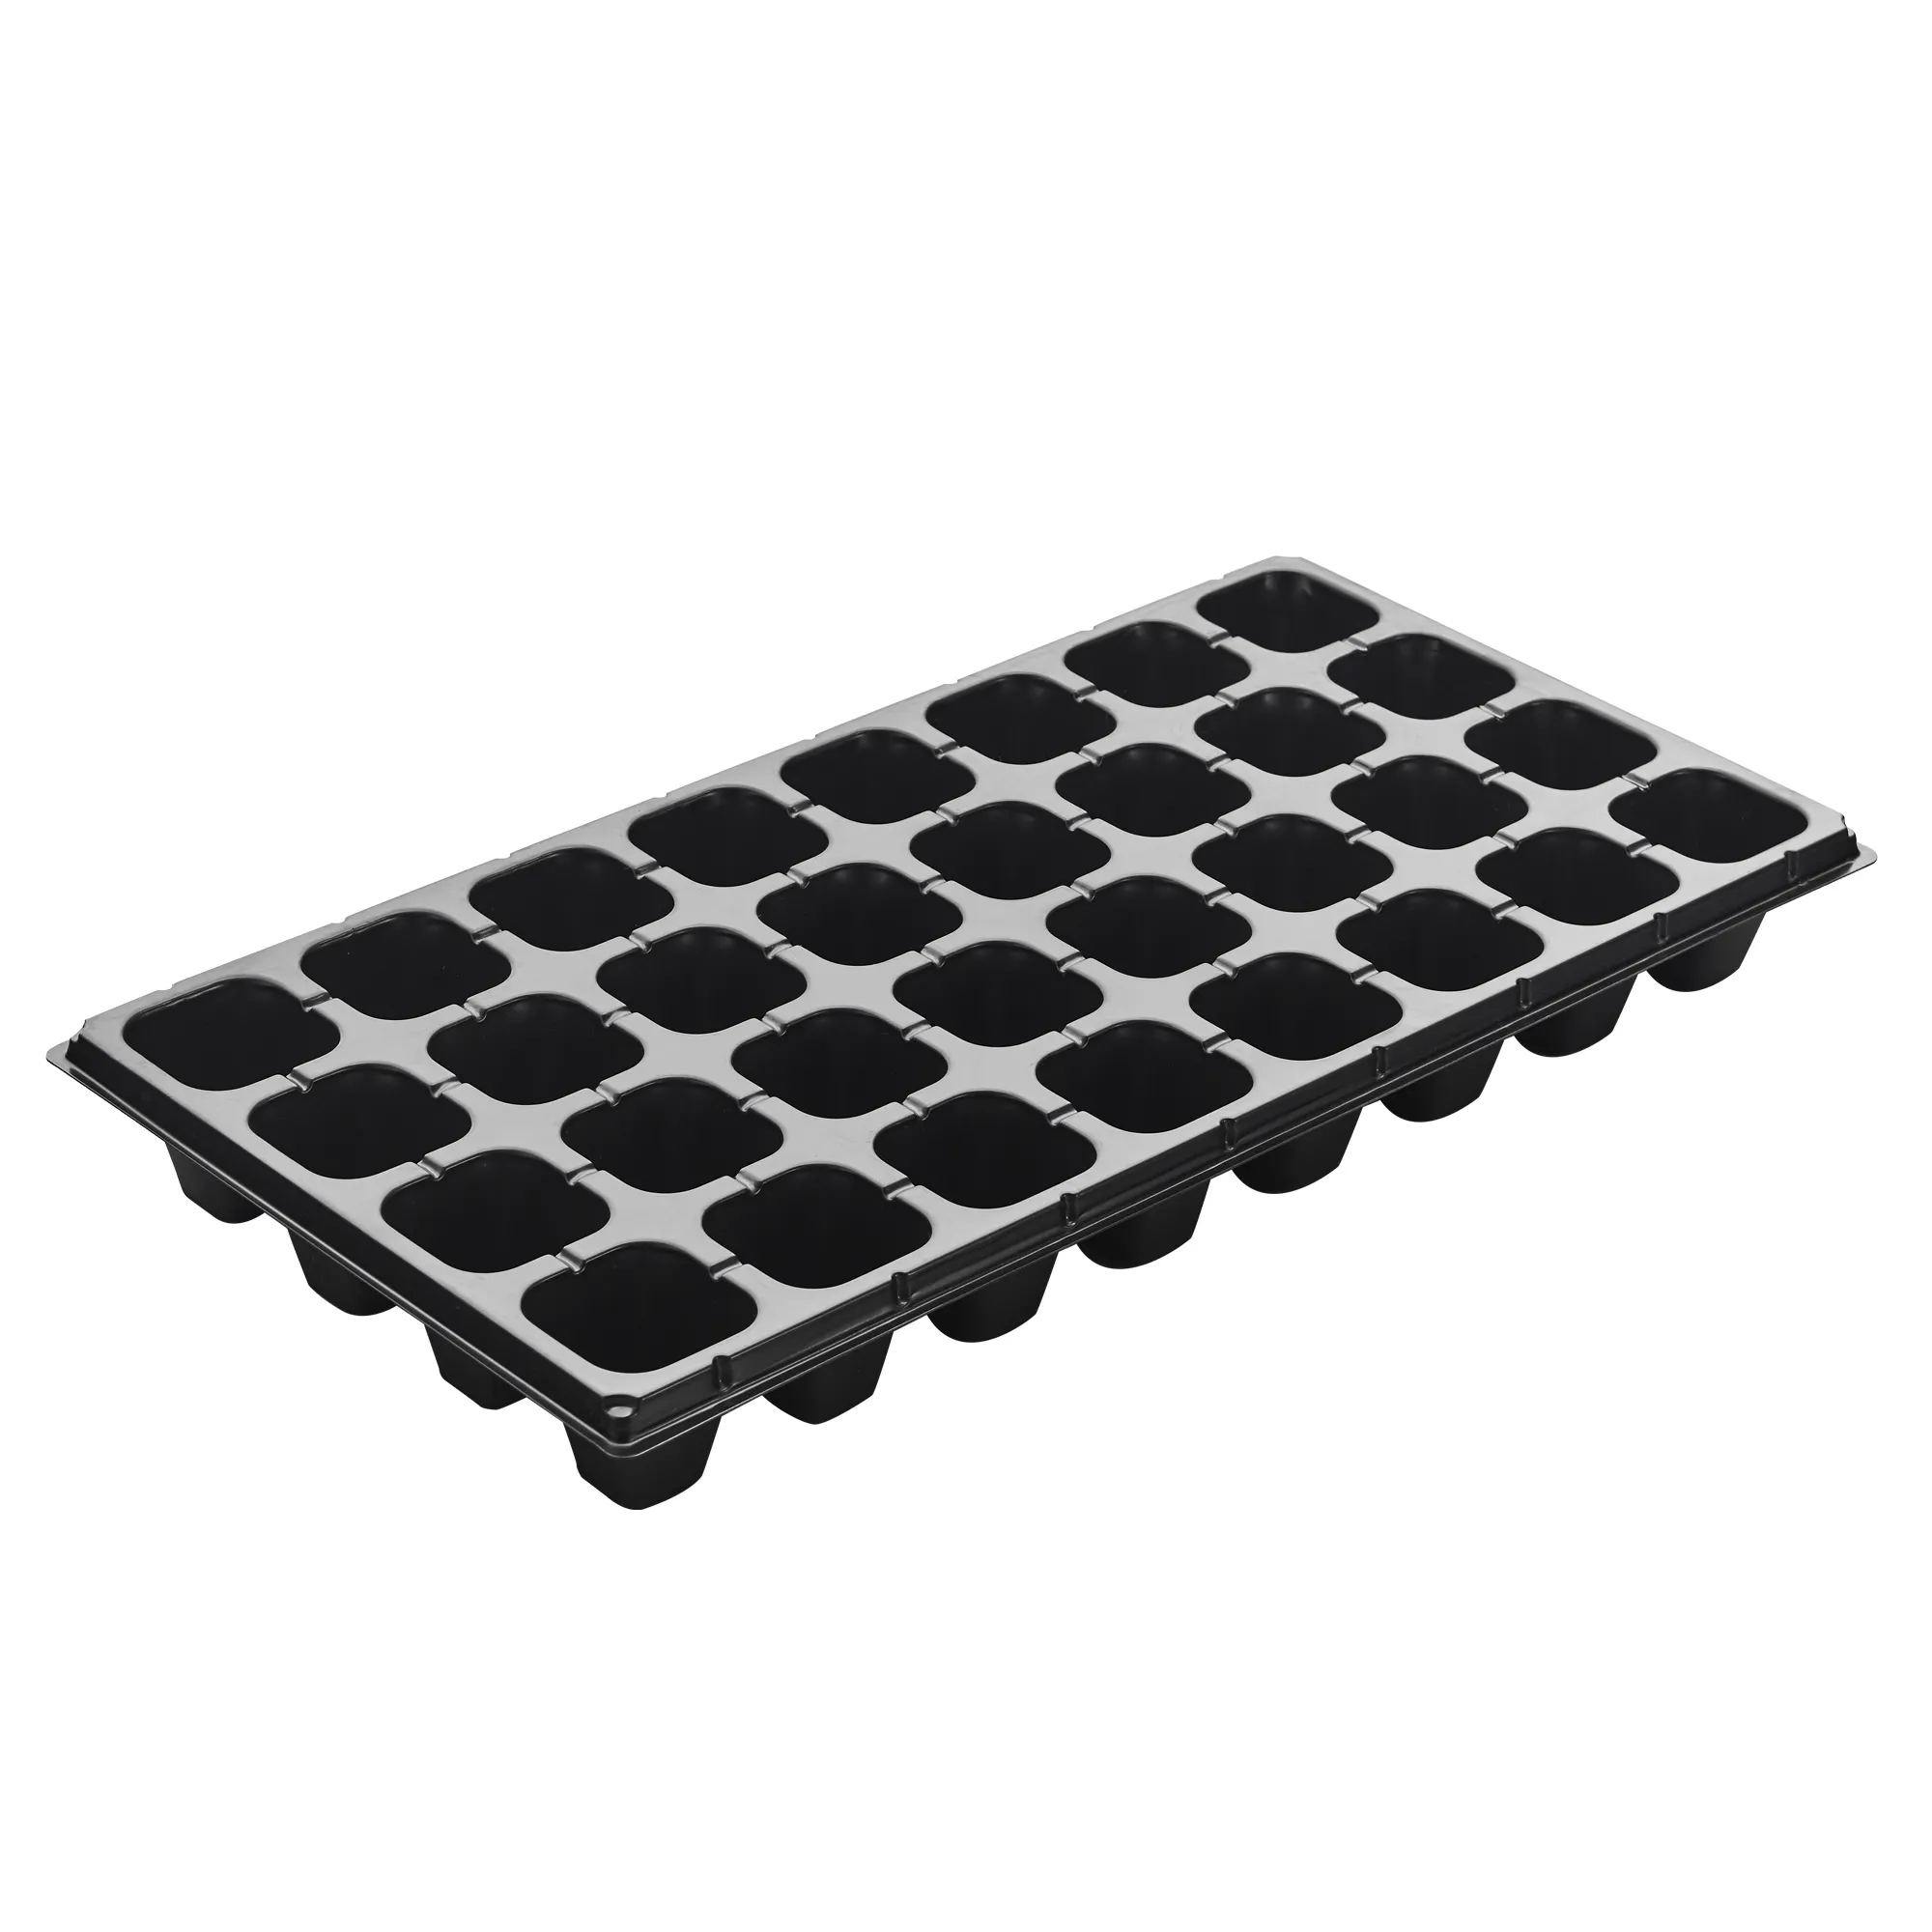 32 cells Plastic Seeding Tray plastic plant trays for Agriculture greenhouse use seeding tray for vegetable